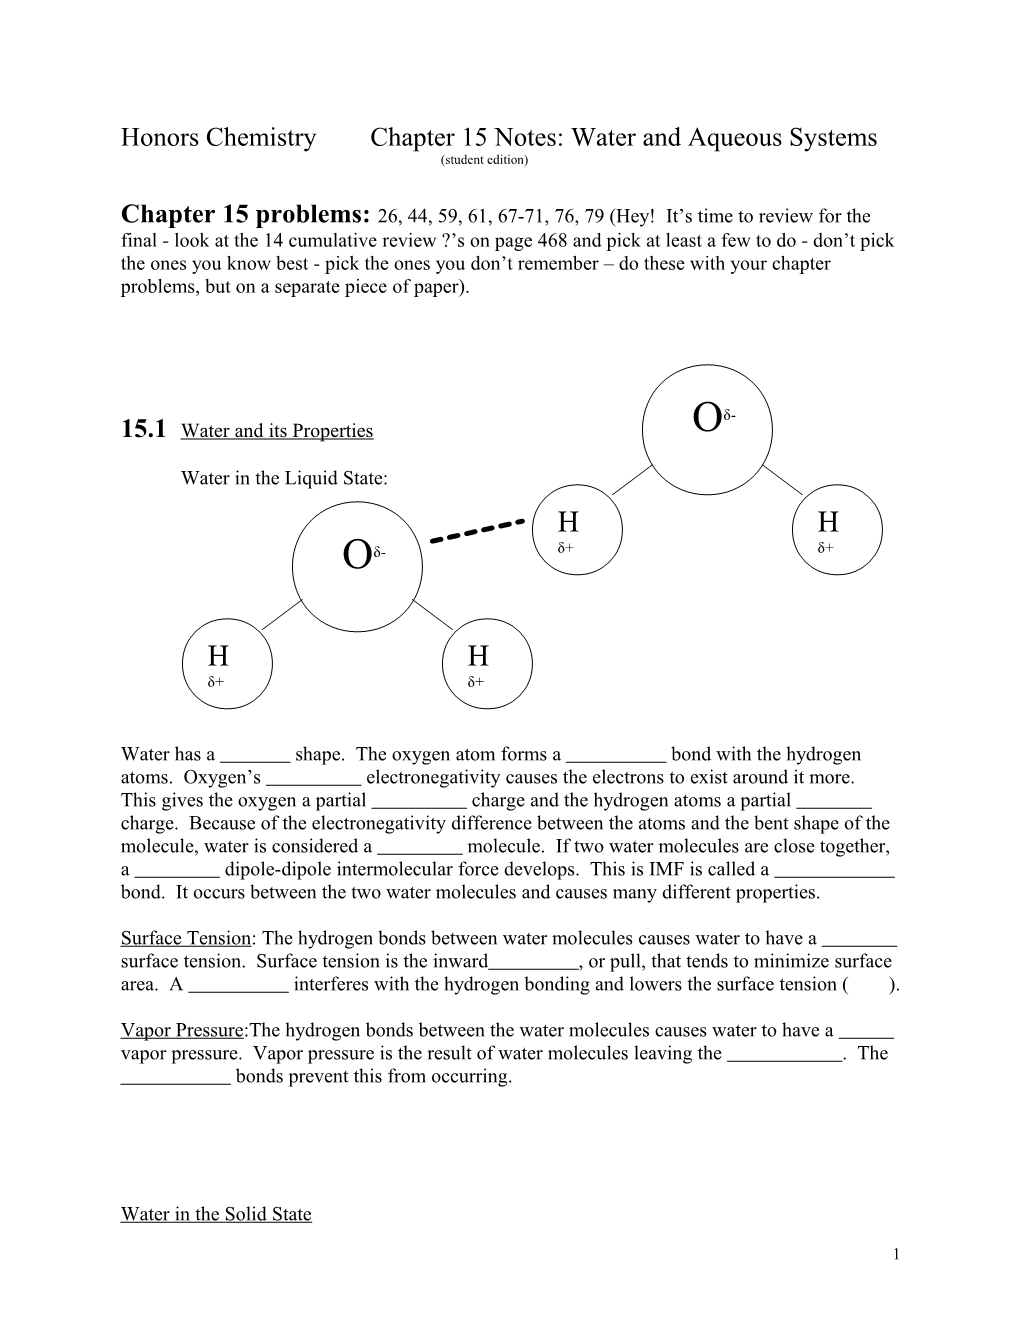 Honors Chemistry Chapter 15 Notes: Water and Aqueous Systems